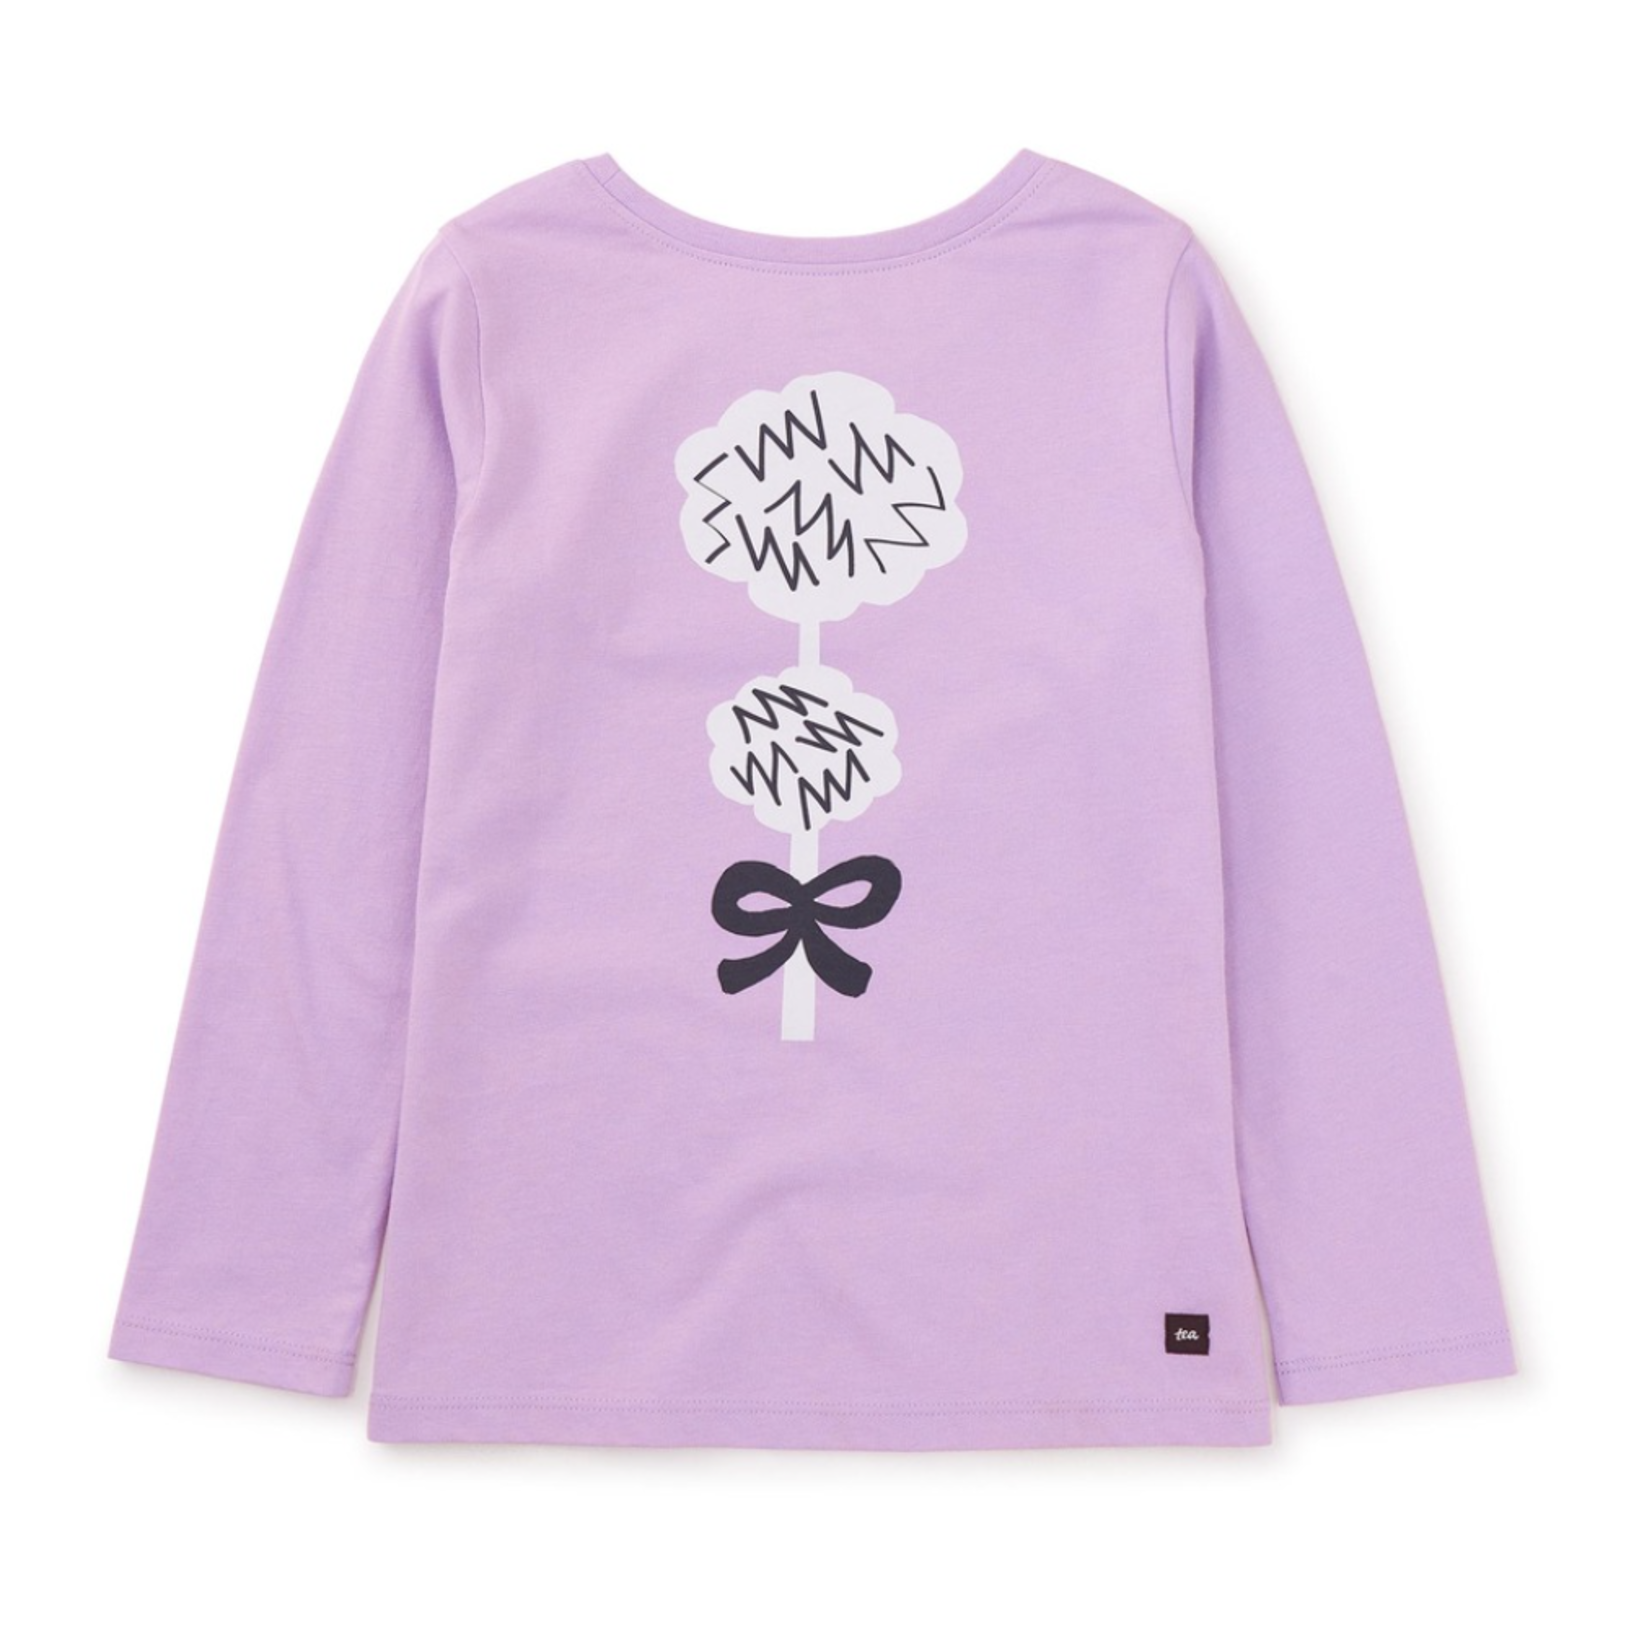 Tea Collection Poodle and Bow Graphic Tee-Sheer Lilac